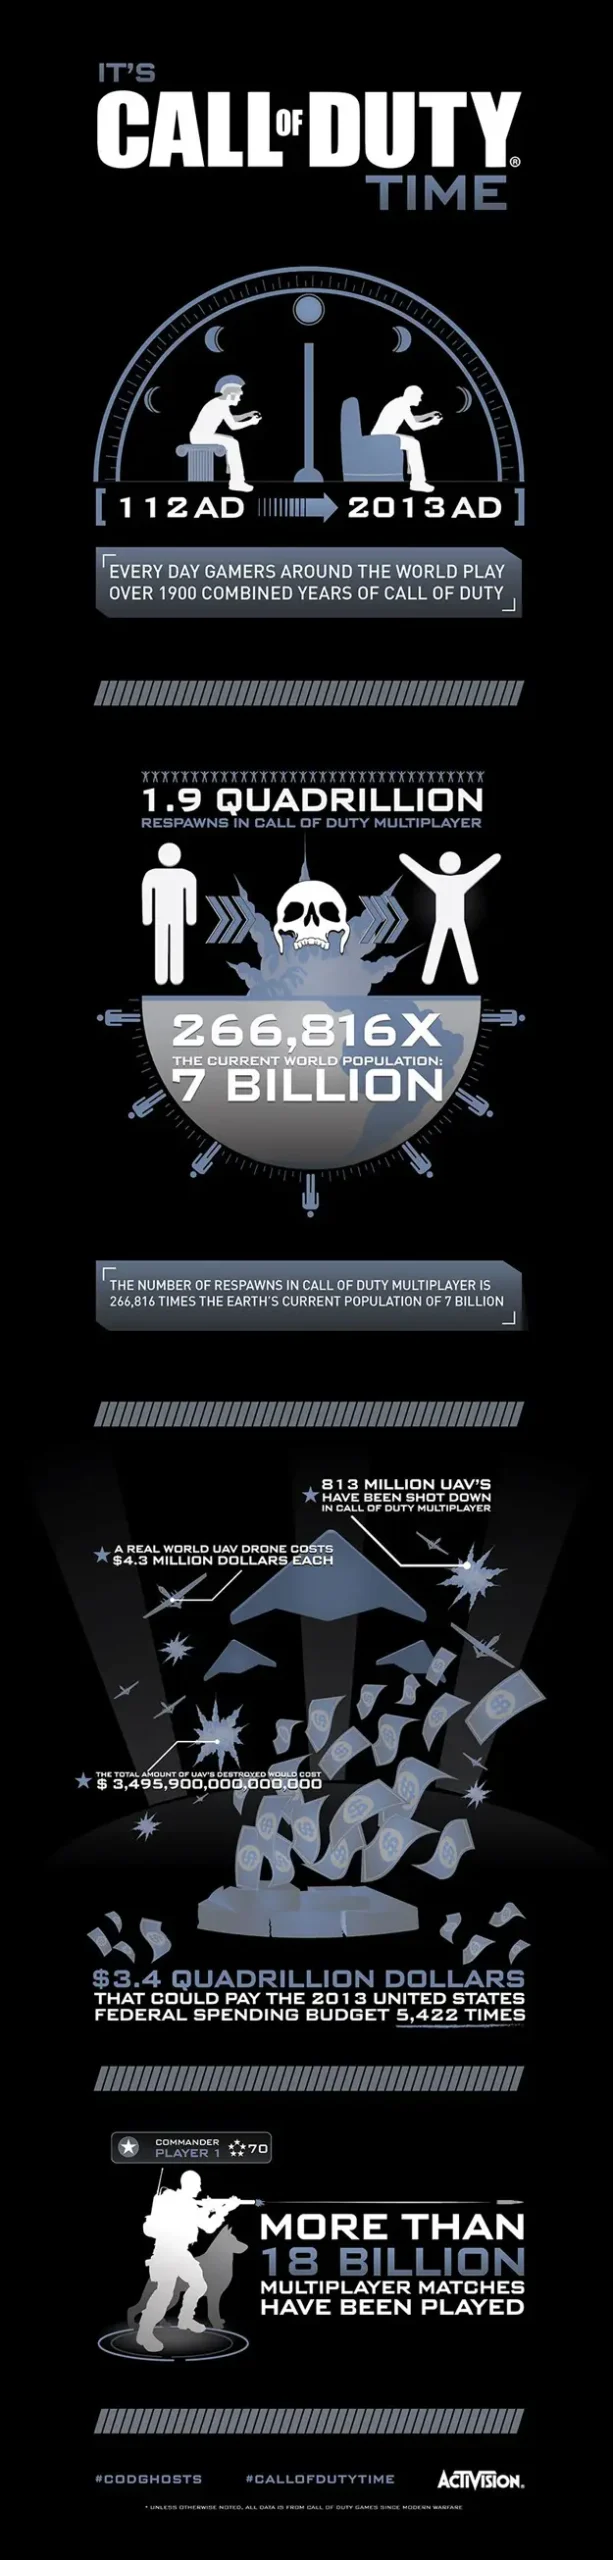 It’s Call Of Duty Time [InfoGraphic]
